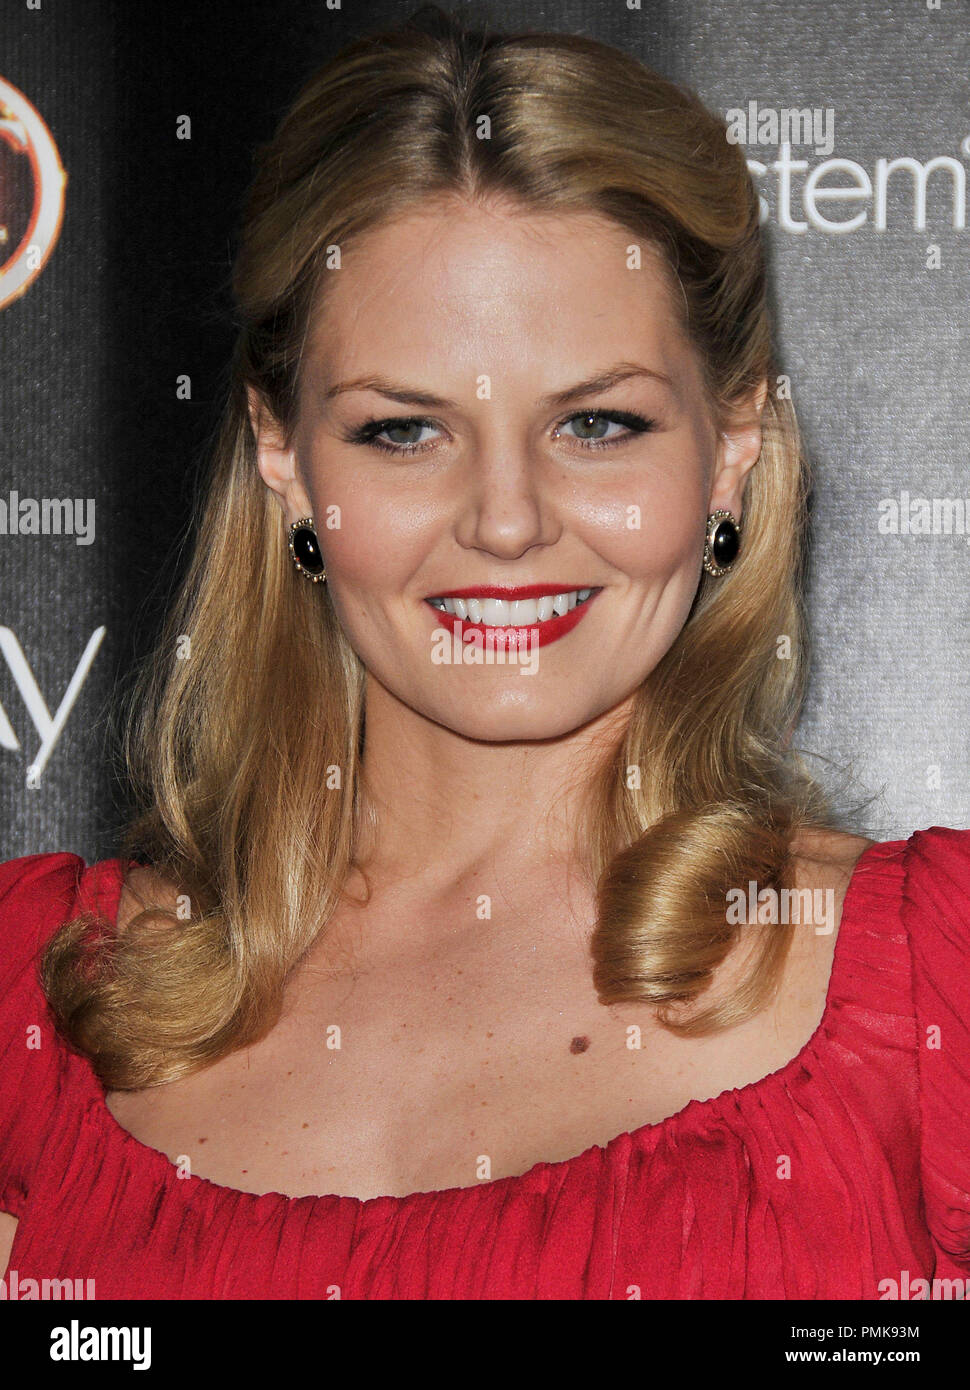 Jennifer Morrison at the TV Guide Magazine 2010 Hot List Party held at Drai's at the W. Hollywood Hotel in Hollywood, CA. The event took place on Monday, November 8, 2010. Photo by PRPP Pacific Rim Photo Press/PictureLux. File Reference # 30683 092PRPP   For Editorial Use Only -  All Rights Reserved Stock Photo